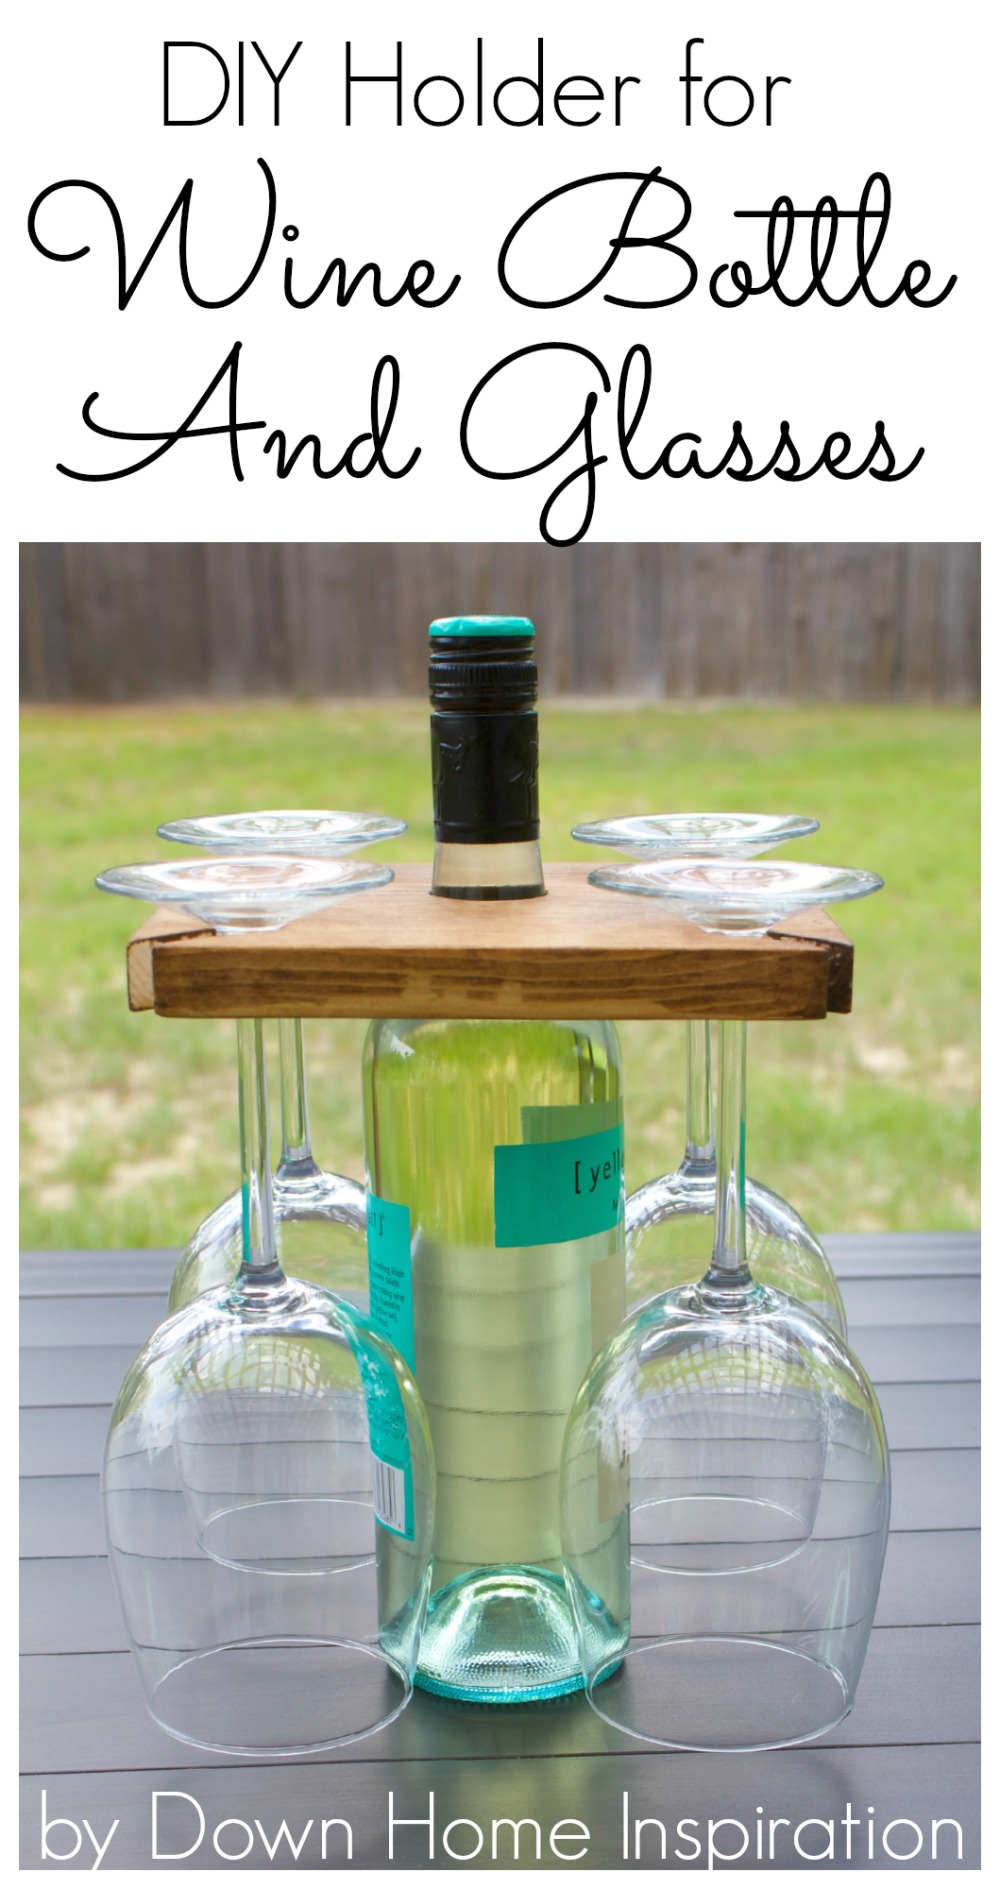 How to Make a DIY Holder for a Wine Bottle and Glasses - Down Home